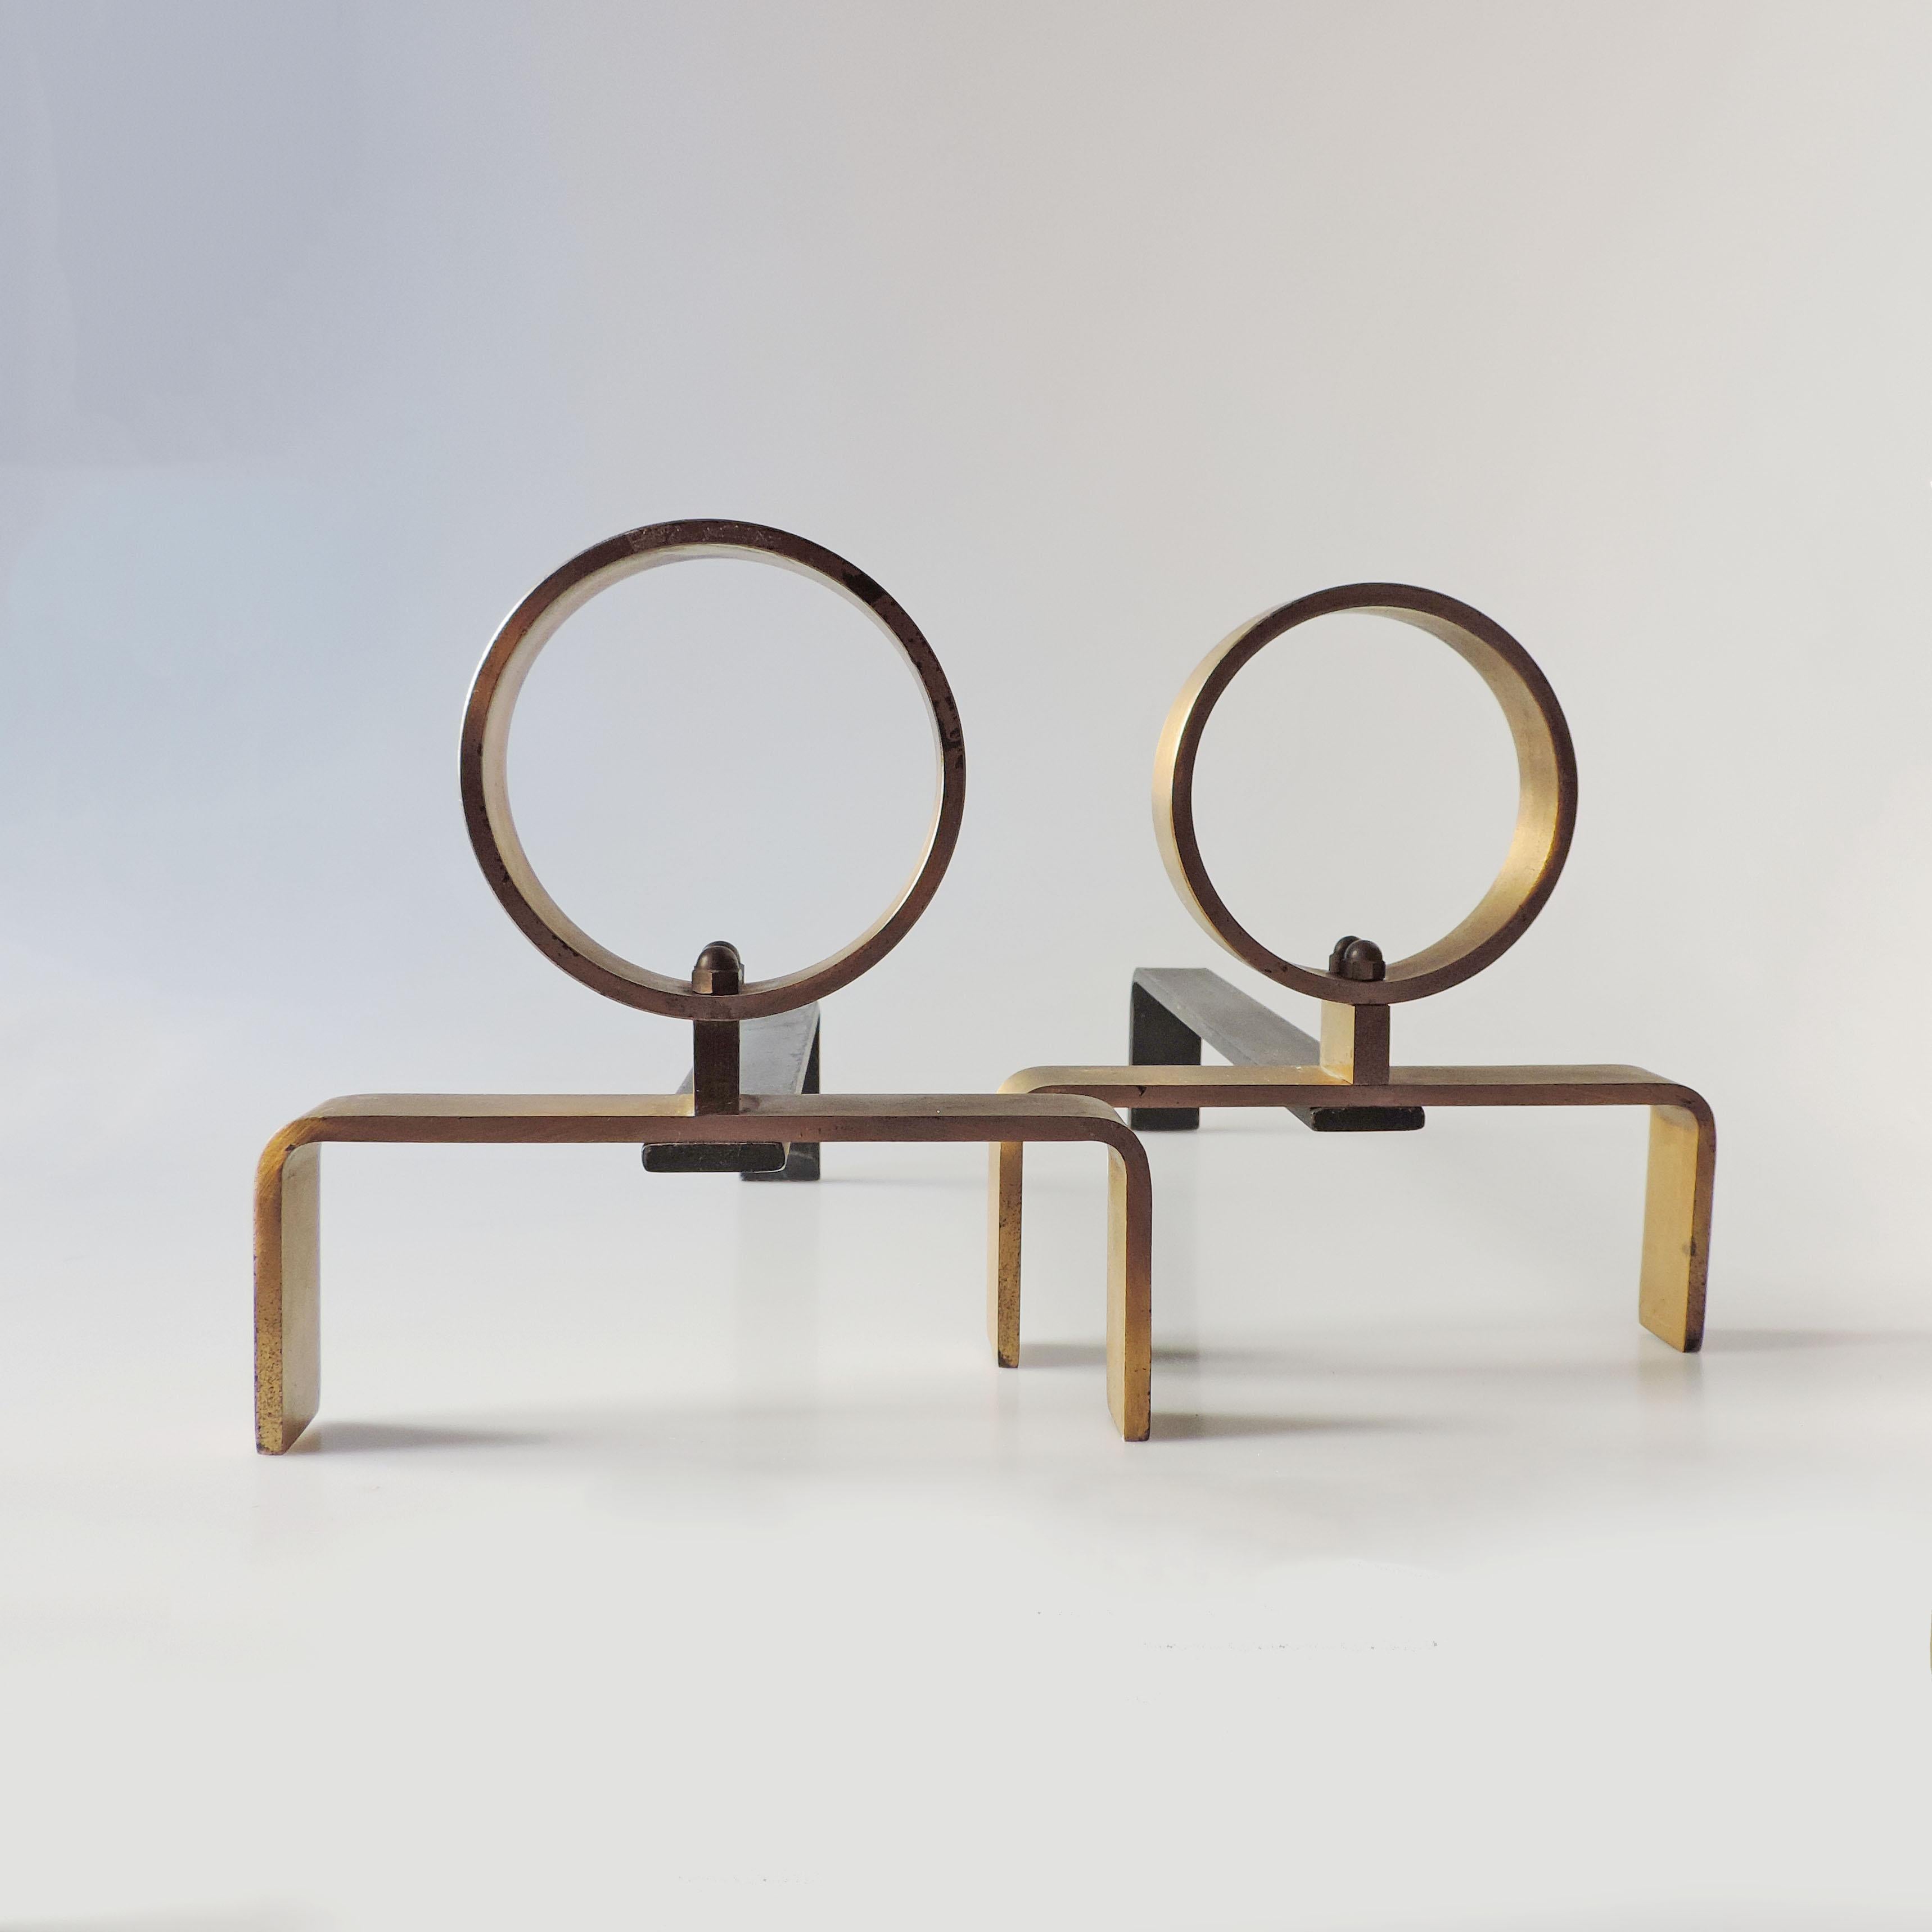 Italian 1950s fireplace andirons in brass and iron.
Attributed to Melchiorre Bega.
Never used.